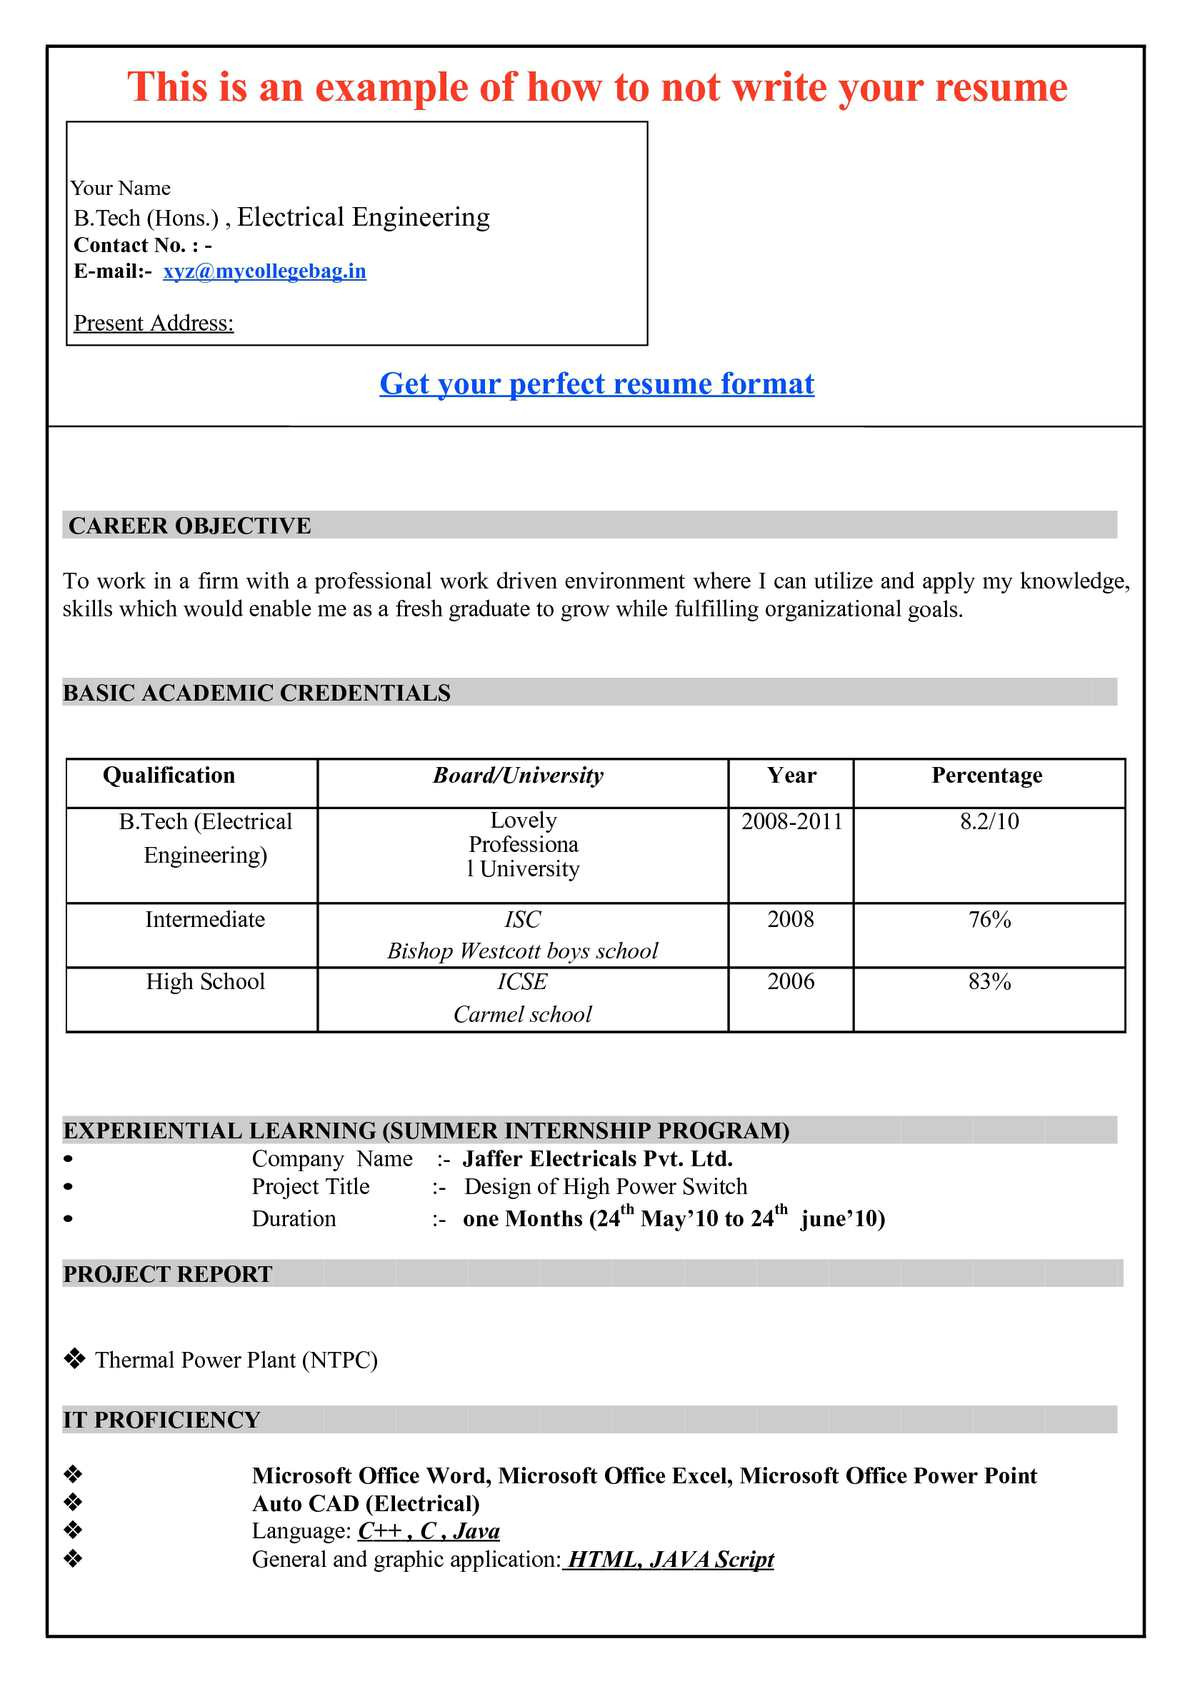 Sample Objective In Resume for Electrical Engineer CalamÃ©o – Samples Resume for Freshers Engineers Pdf